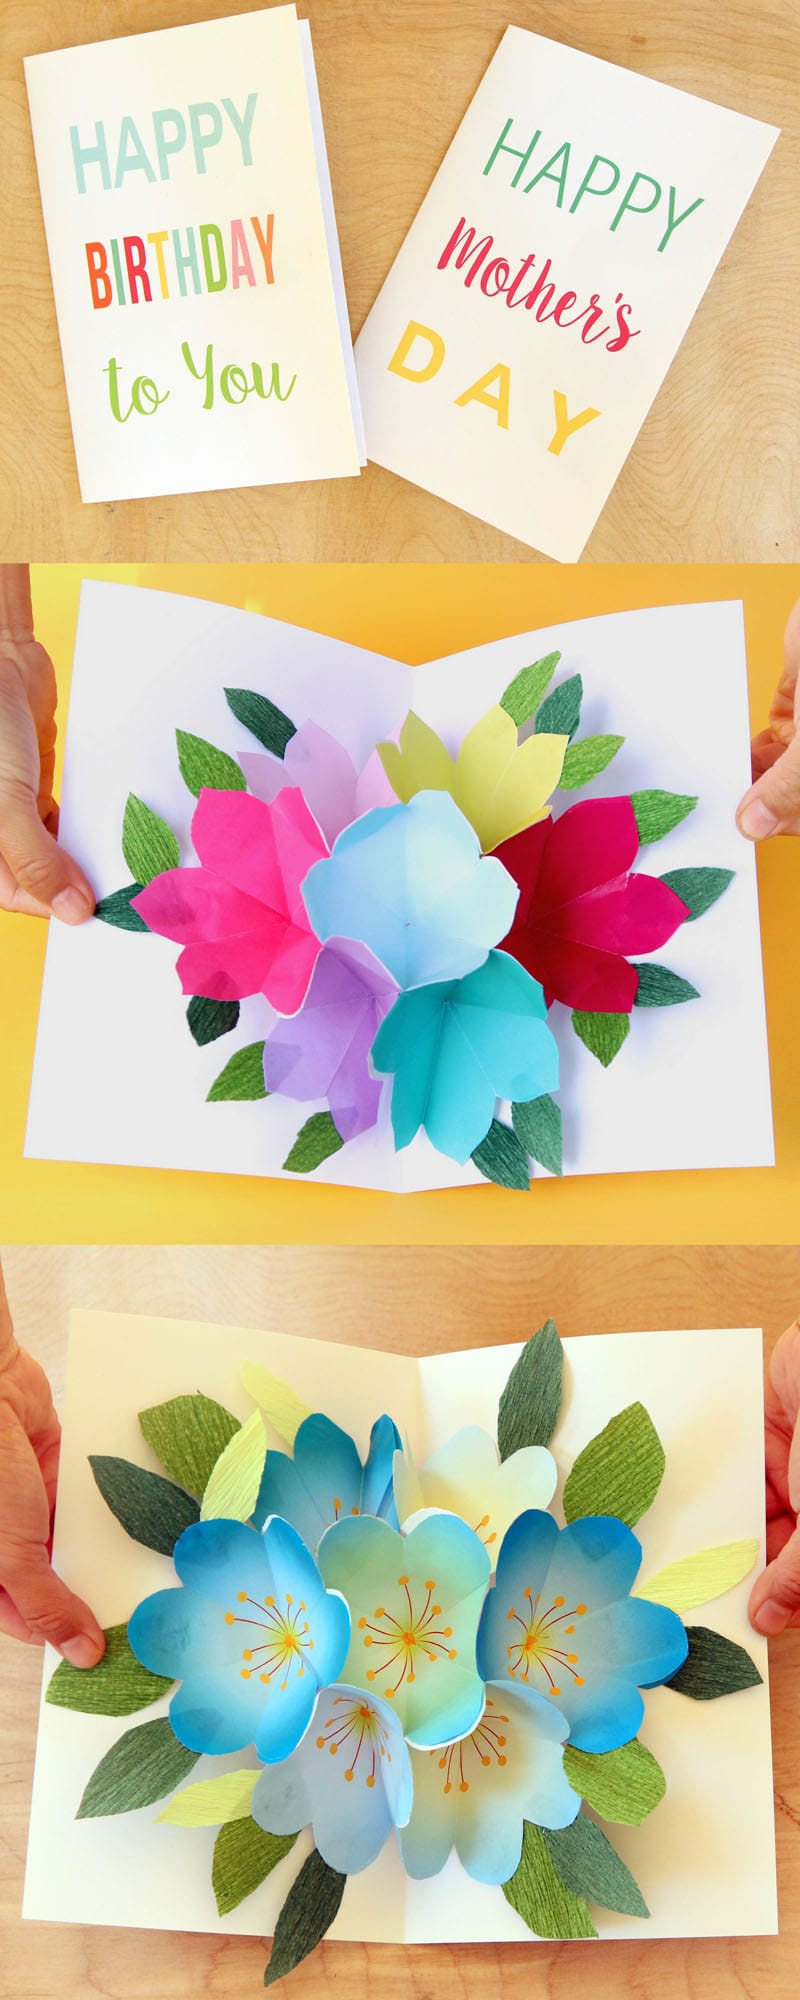 Free Printable Happy Birthday Card With Pop Up Bouquet - A Piece Of - Free Printable Birthday Cards For Your Best Friend